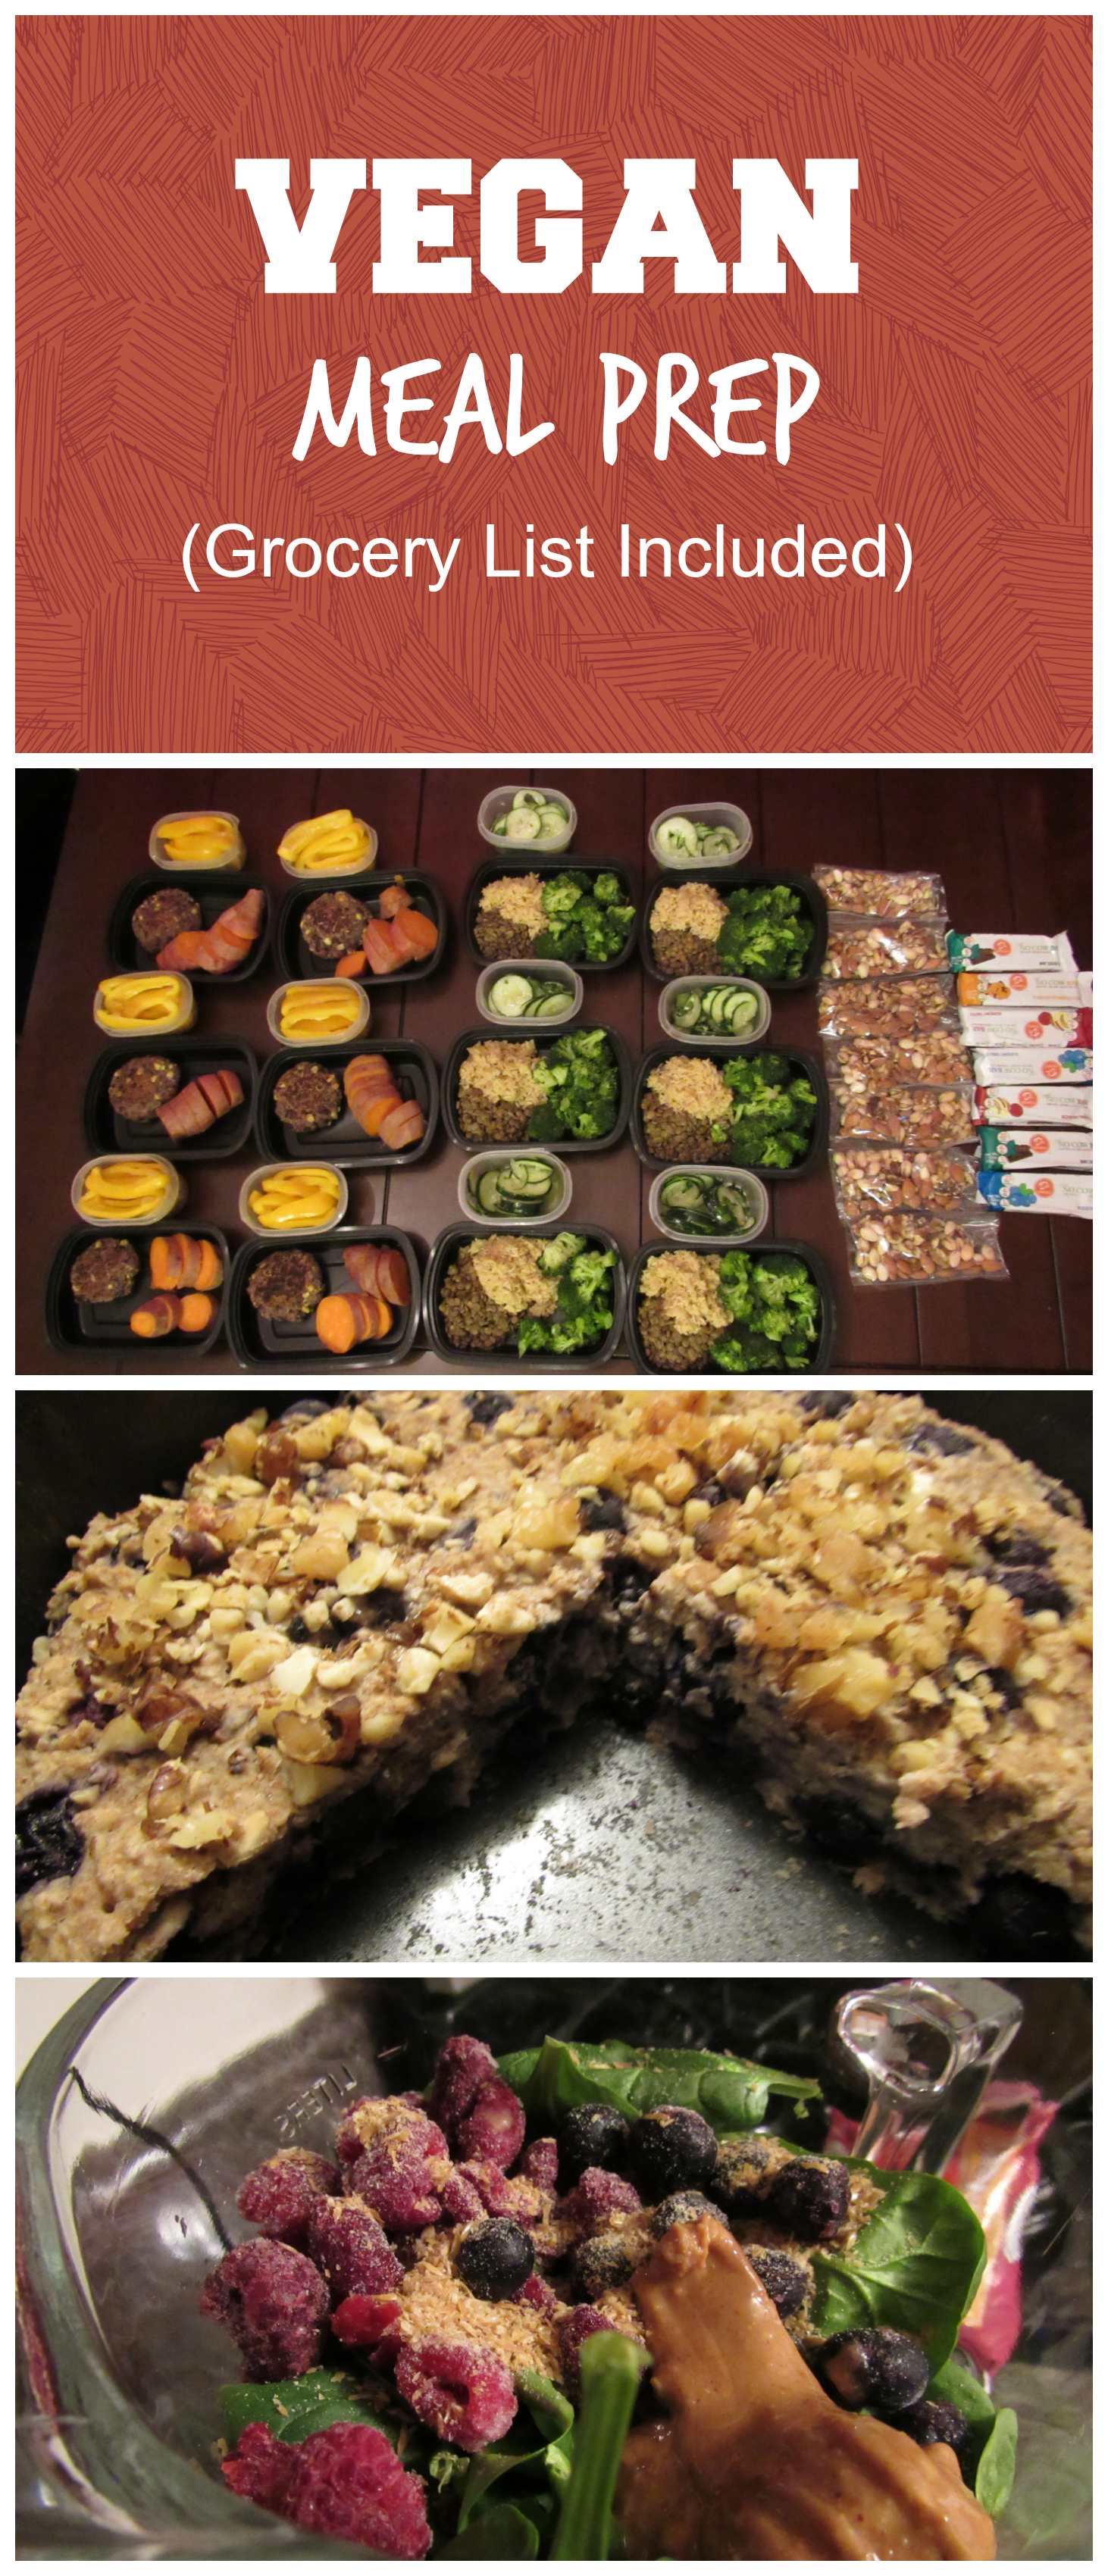 A full week of vegan meal prep! A portion control plan rich in fiber, nutrients, healthy fats, and protein.